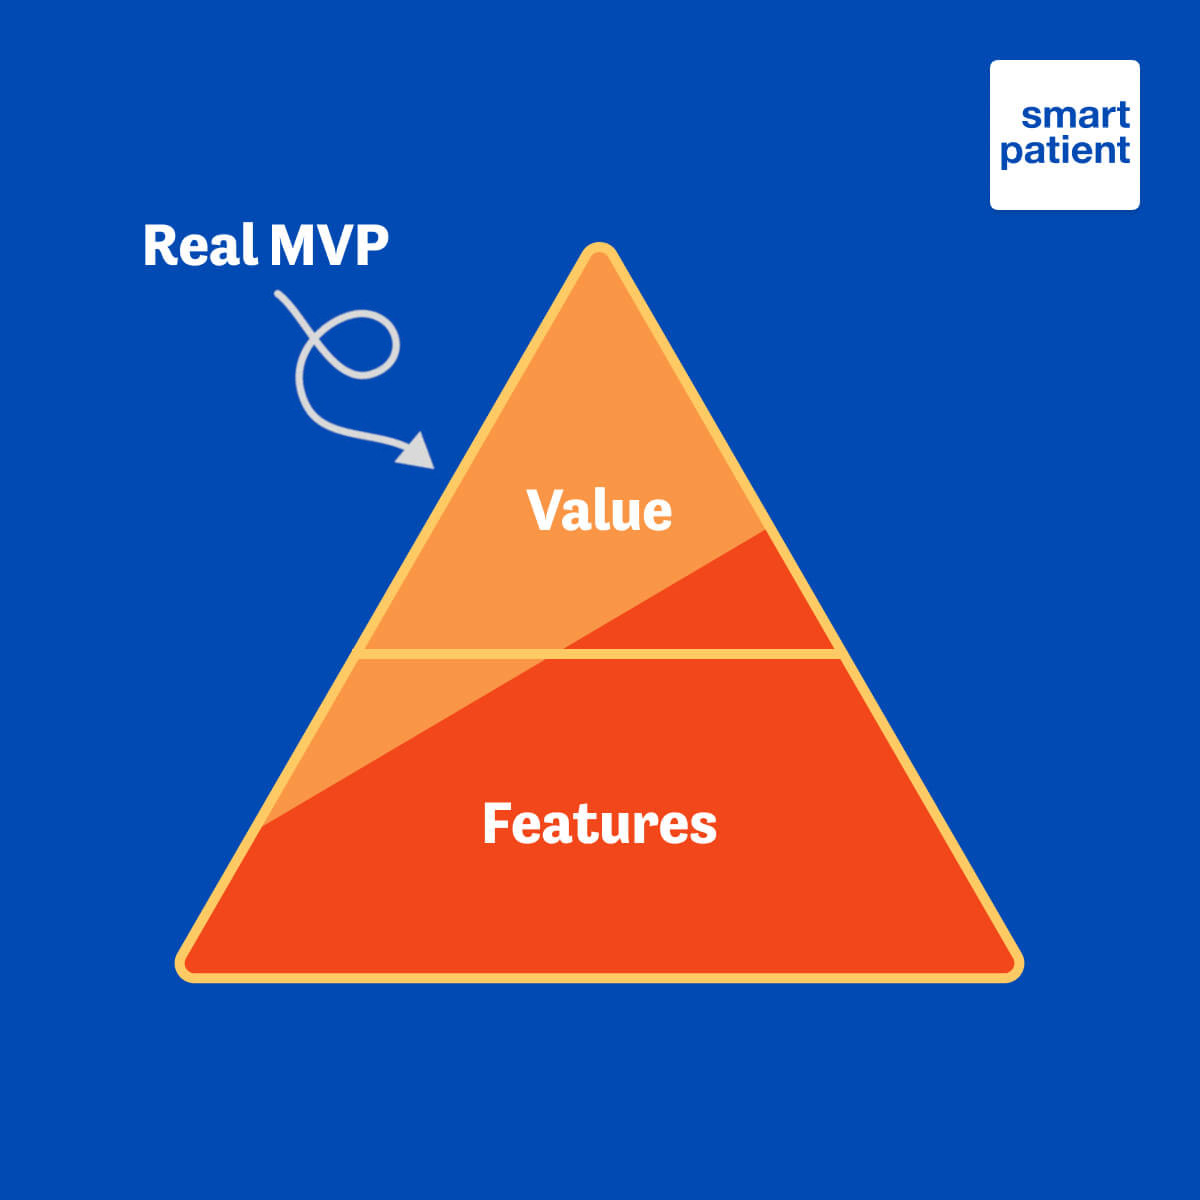 image showing that providing value rather that features represents the true MPV